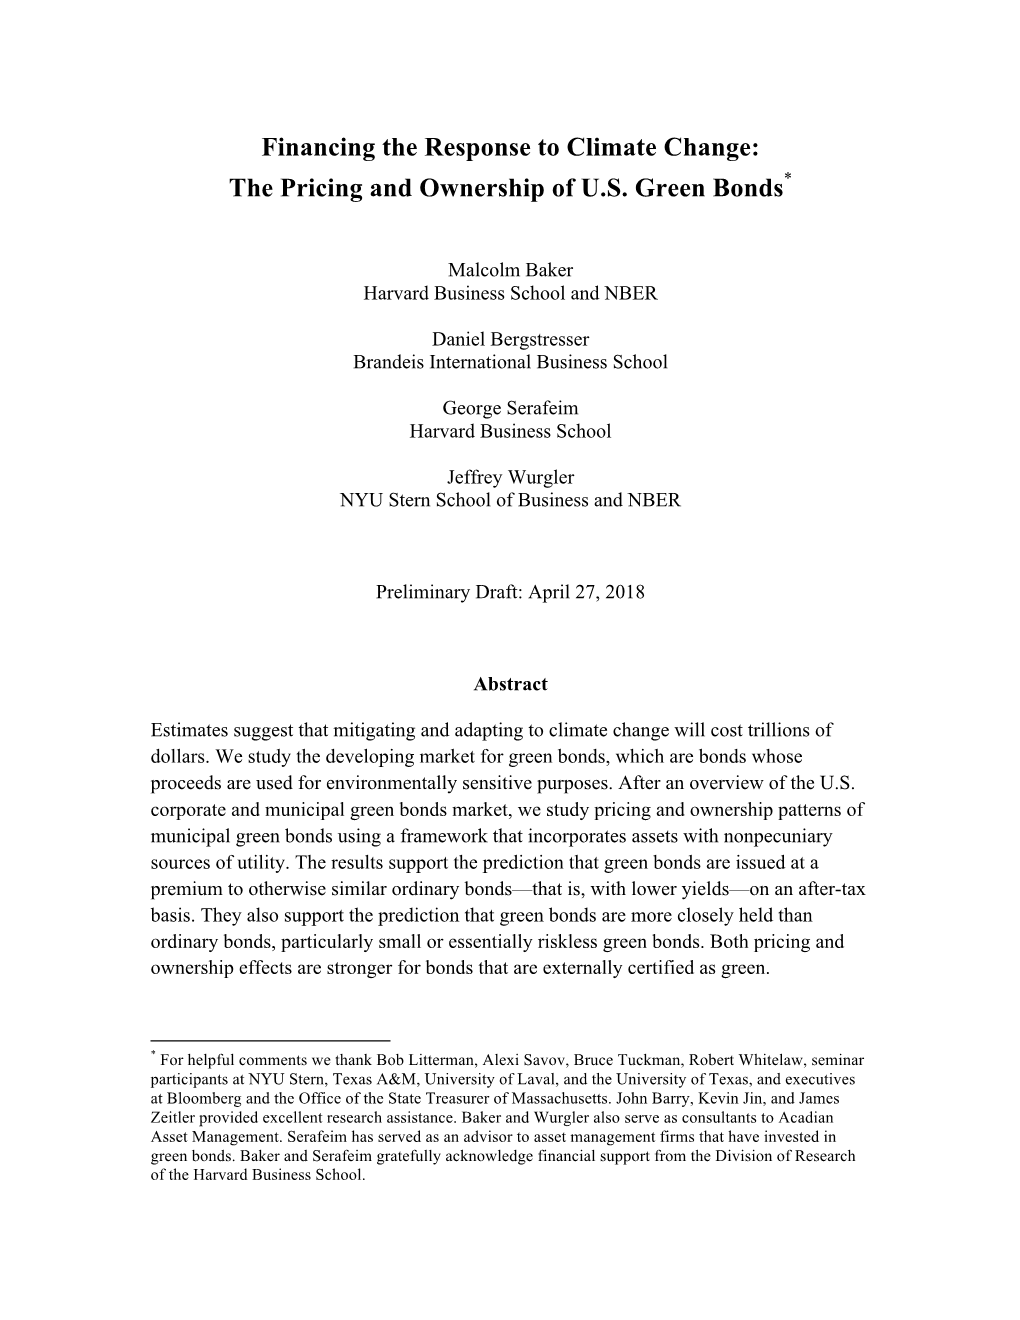 The Pricing and Ownership of US Green Bonds